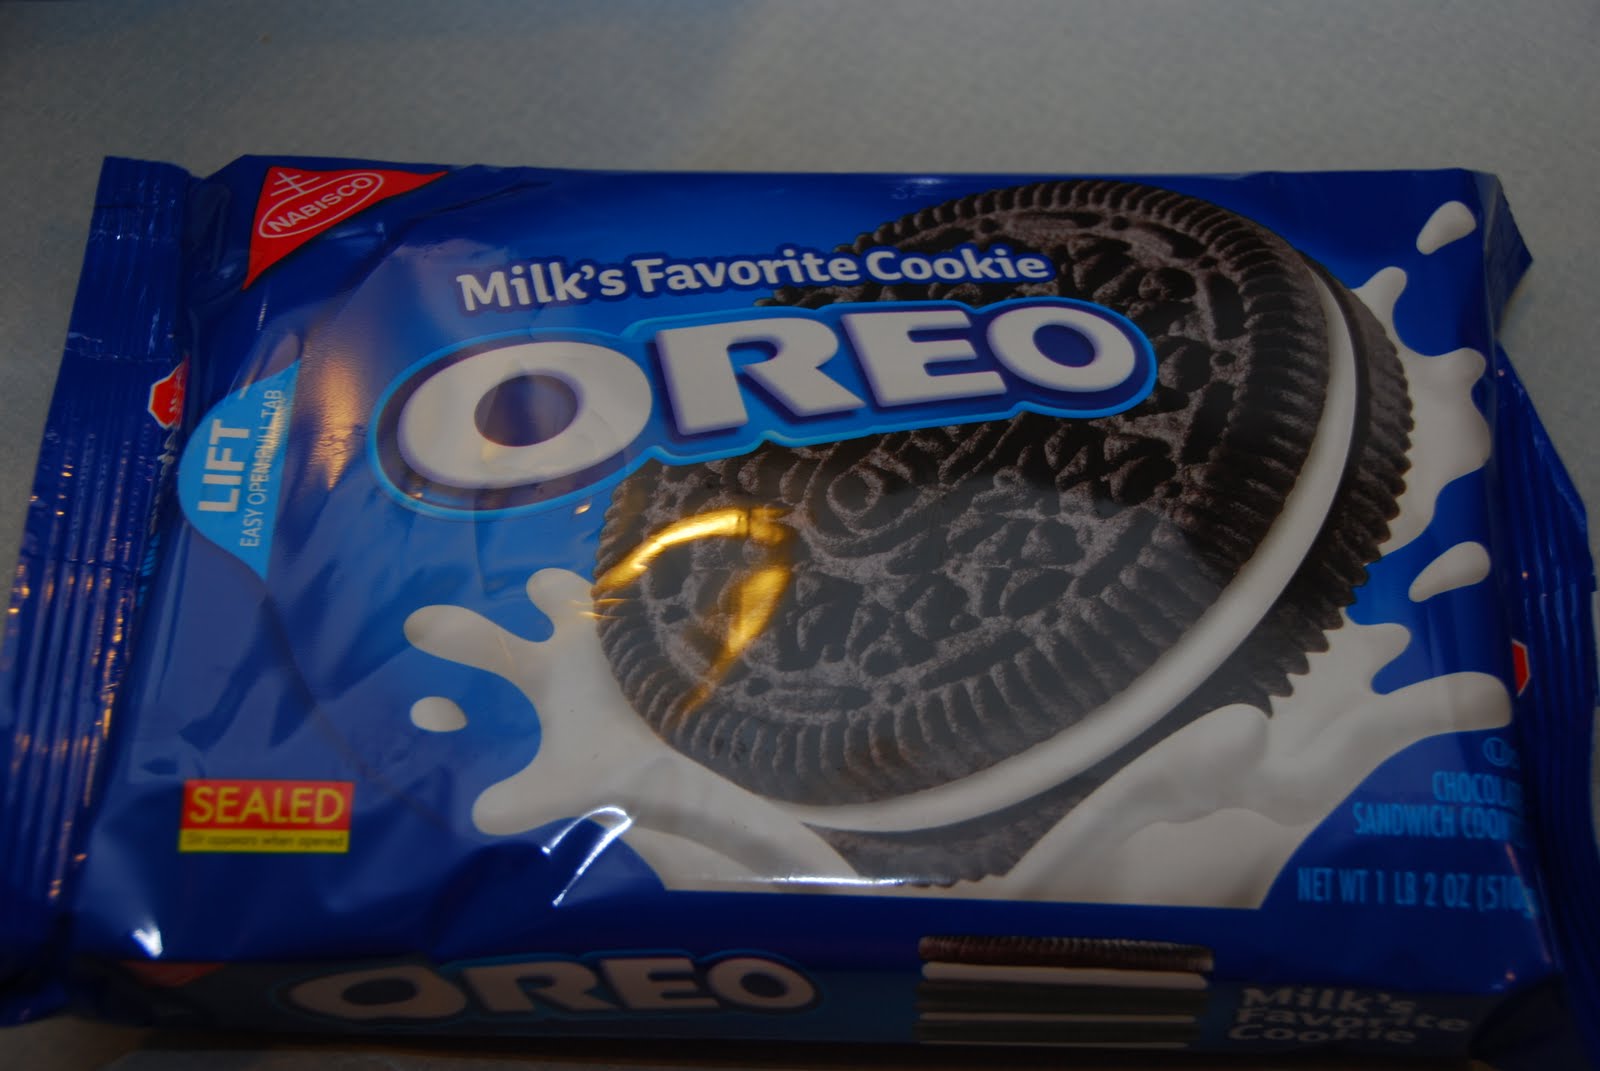 How Many Oreo Cookies in a Package